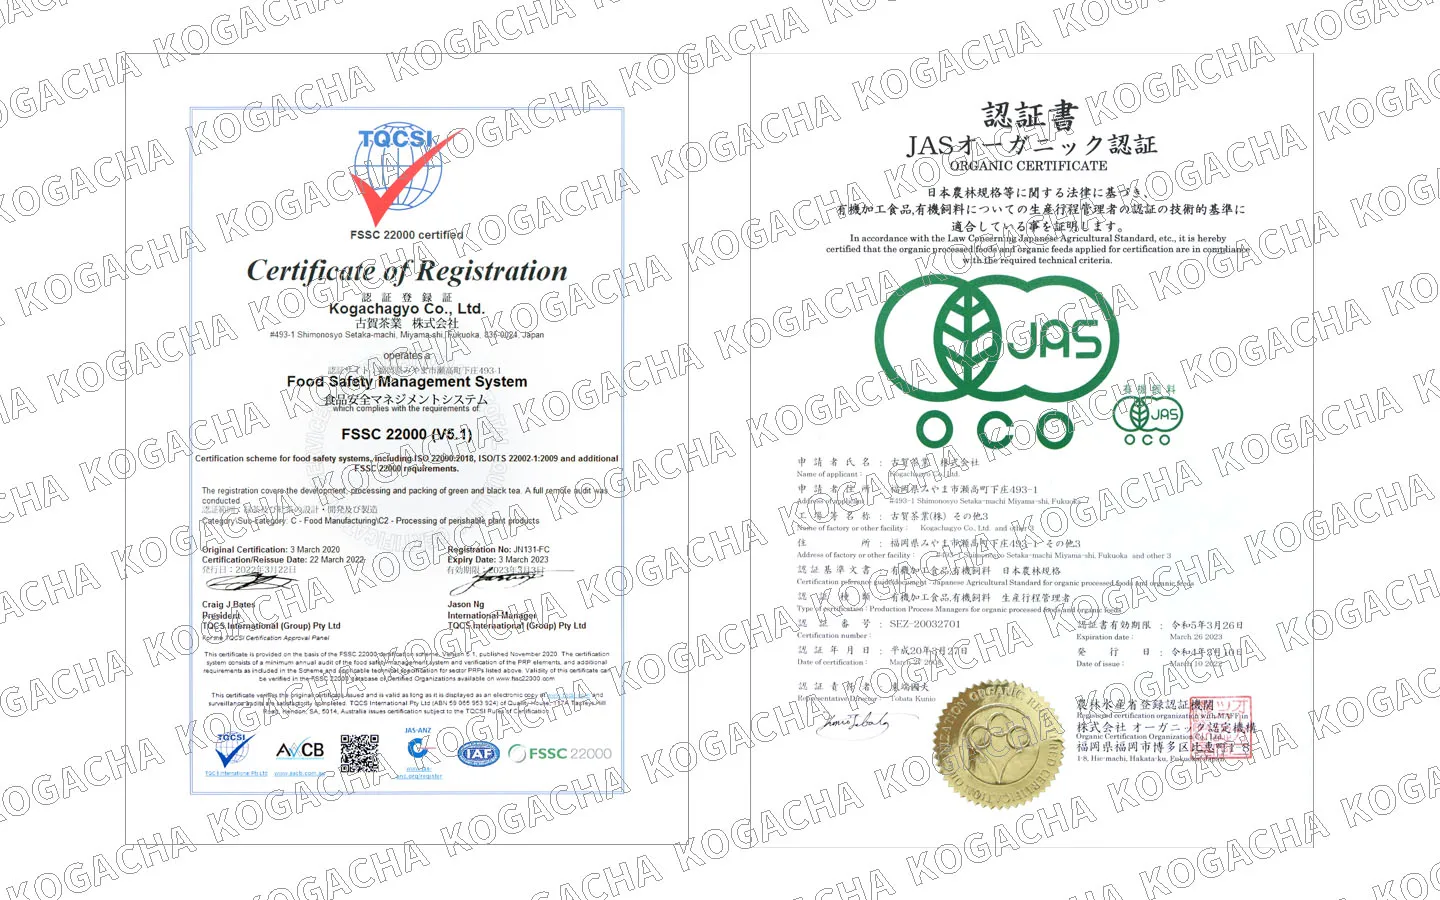 JAS/BIO certified bulk wholesale tea supplier growers in the production